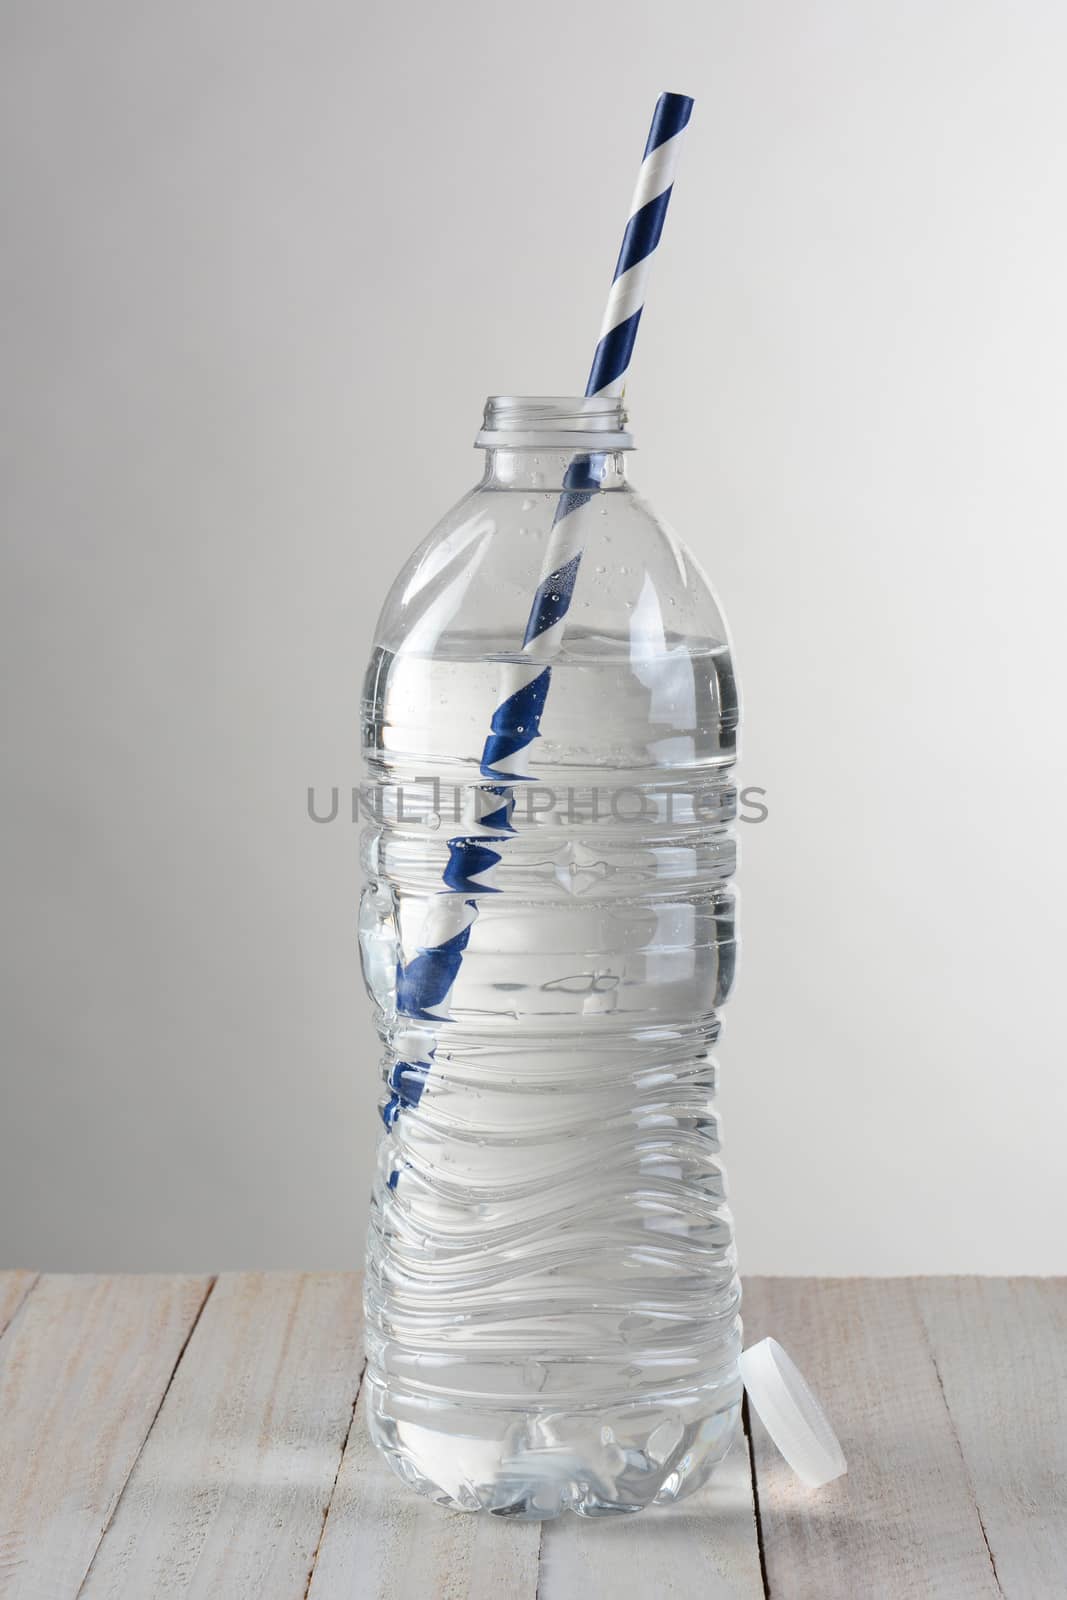 Closeup of a clear water bottle against a light to dark gray background. On a wood table the bottle has a blue and white striped drinking straw.